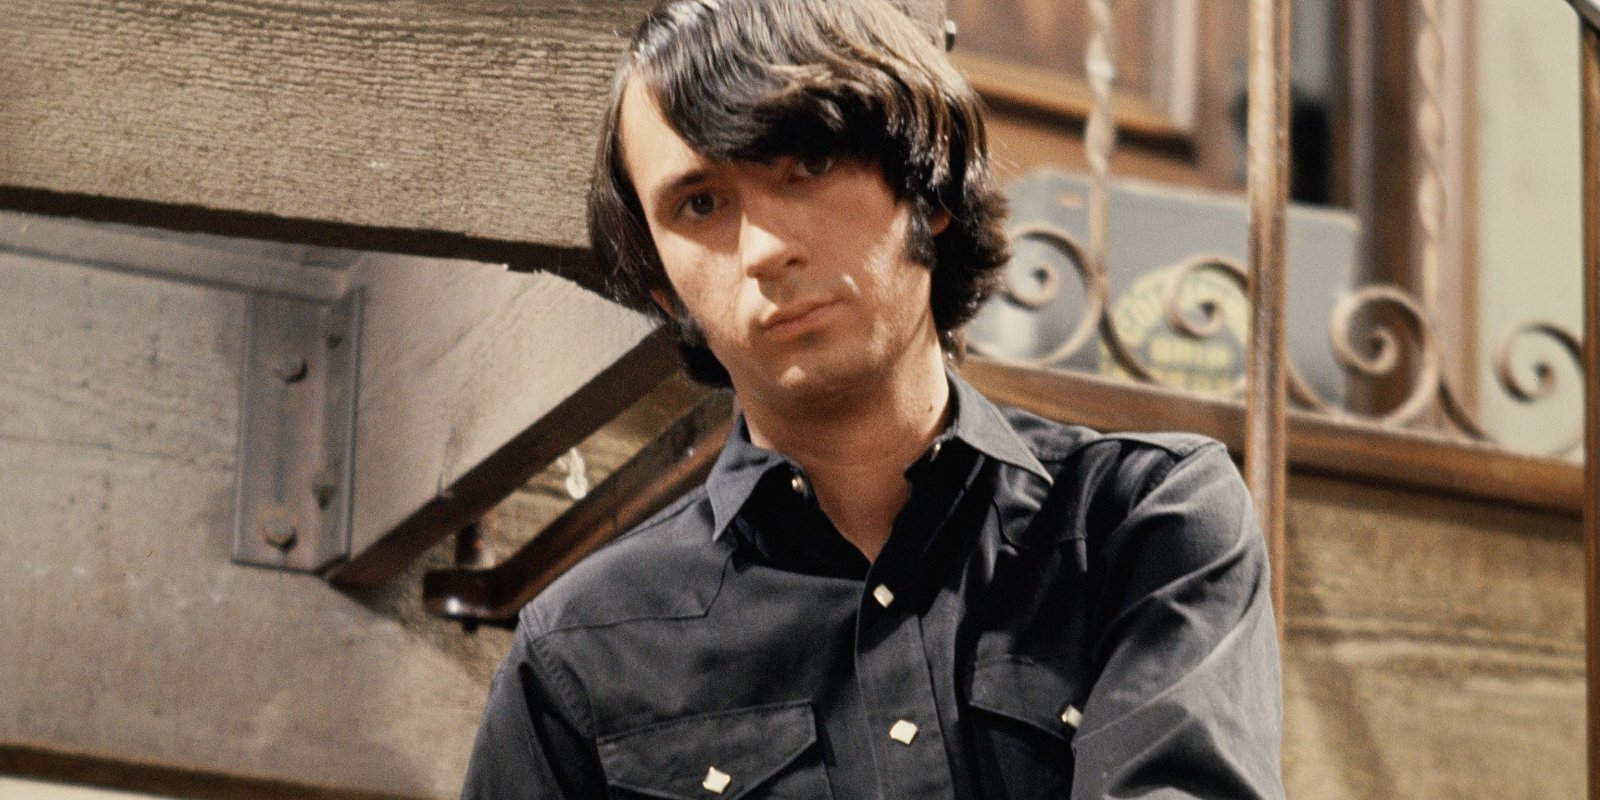 Mike Nesmith on the set of 'The Monkees' televison show in the late 1960s.